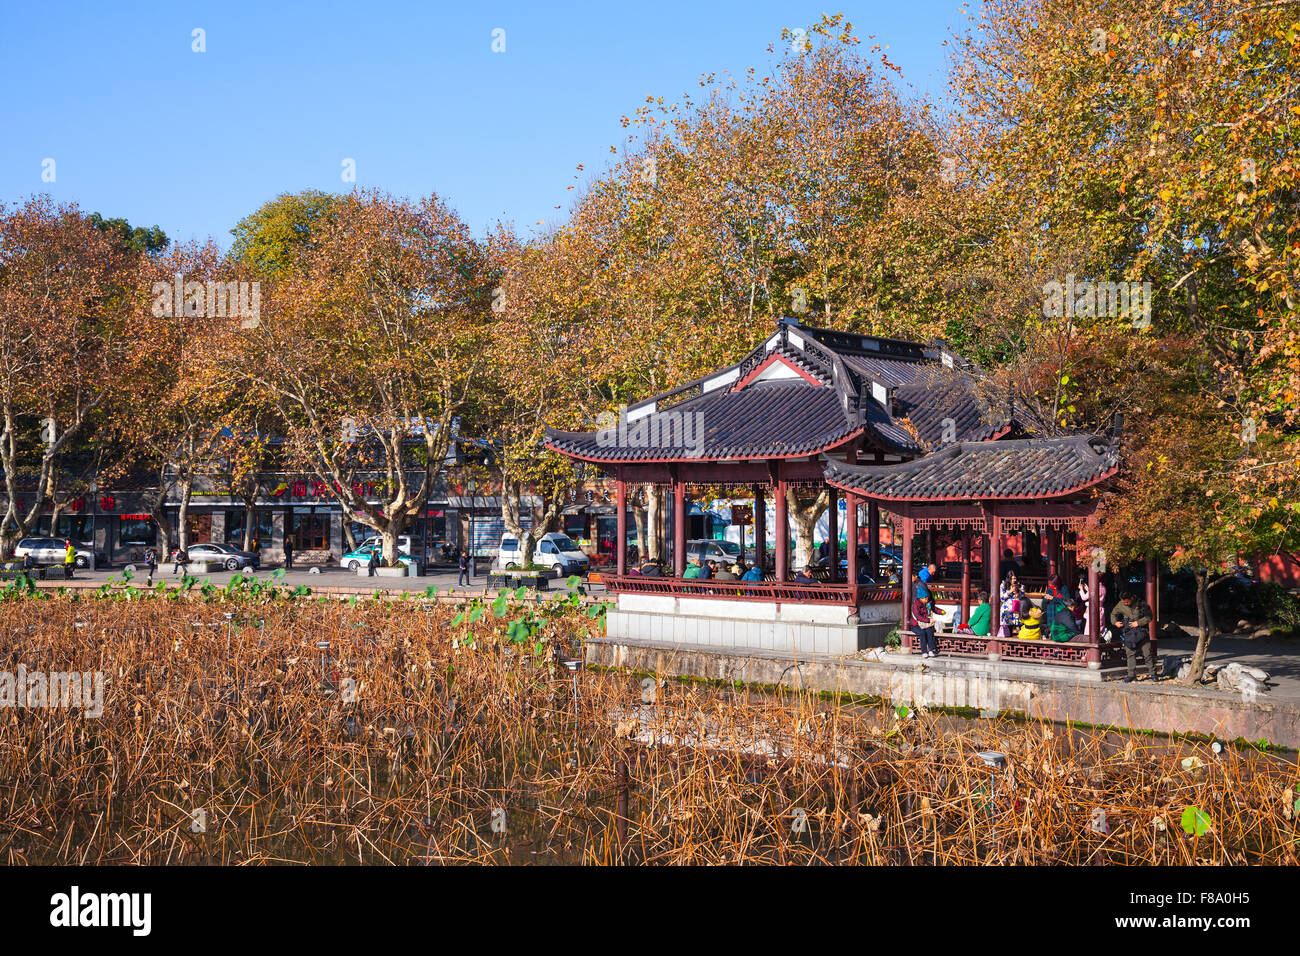 Hangzhou, China - December 5, 2014: Wooden traditional Chinese Gazebo on the coast of West Lake, popular park in Hangzhou city c Stock Photo